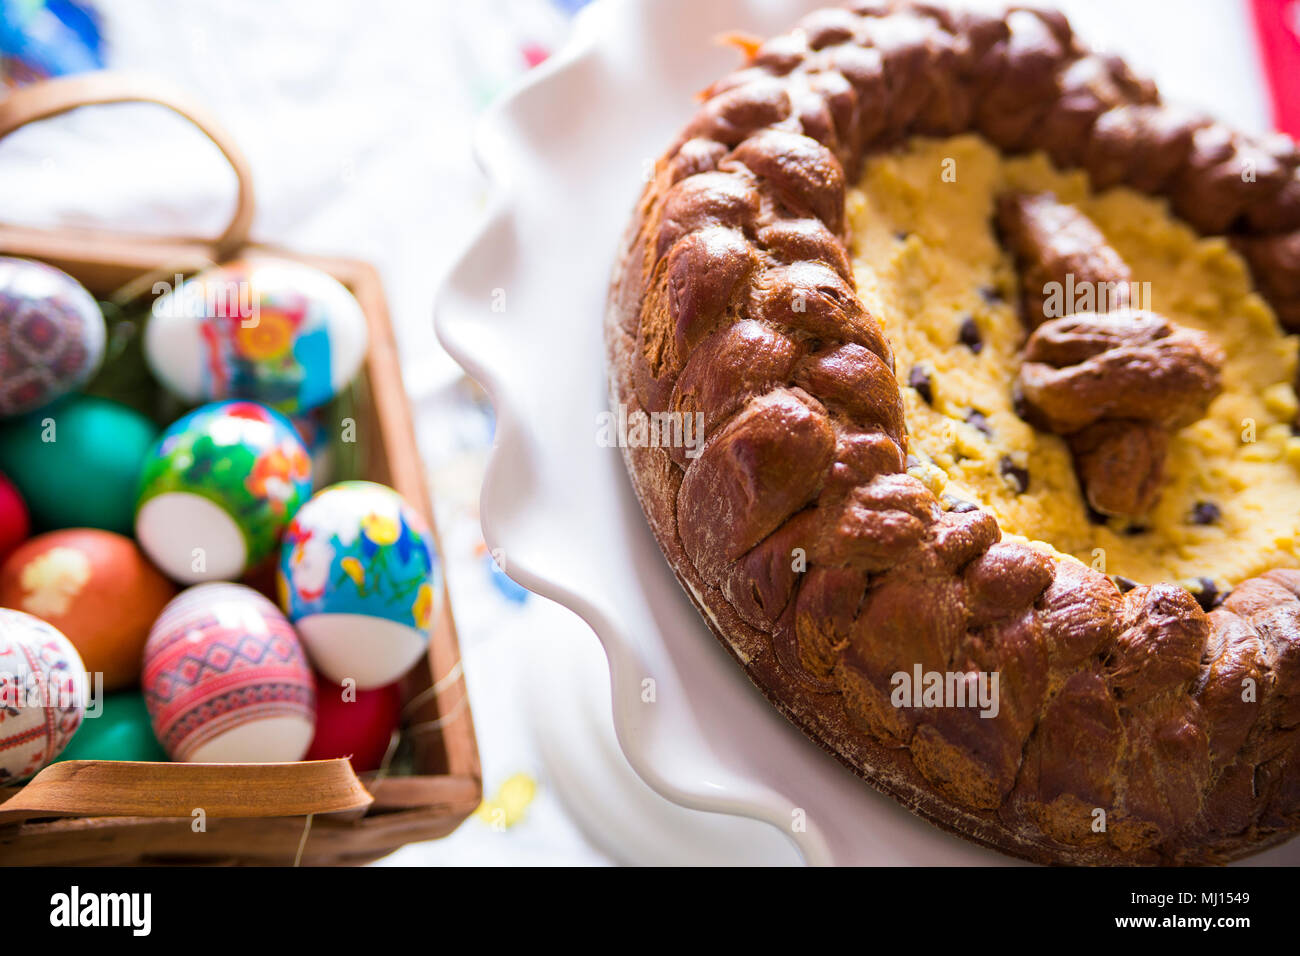 Pasca, Easter Cheesecake